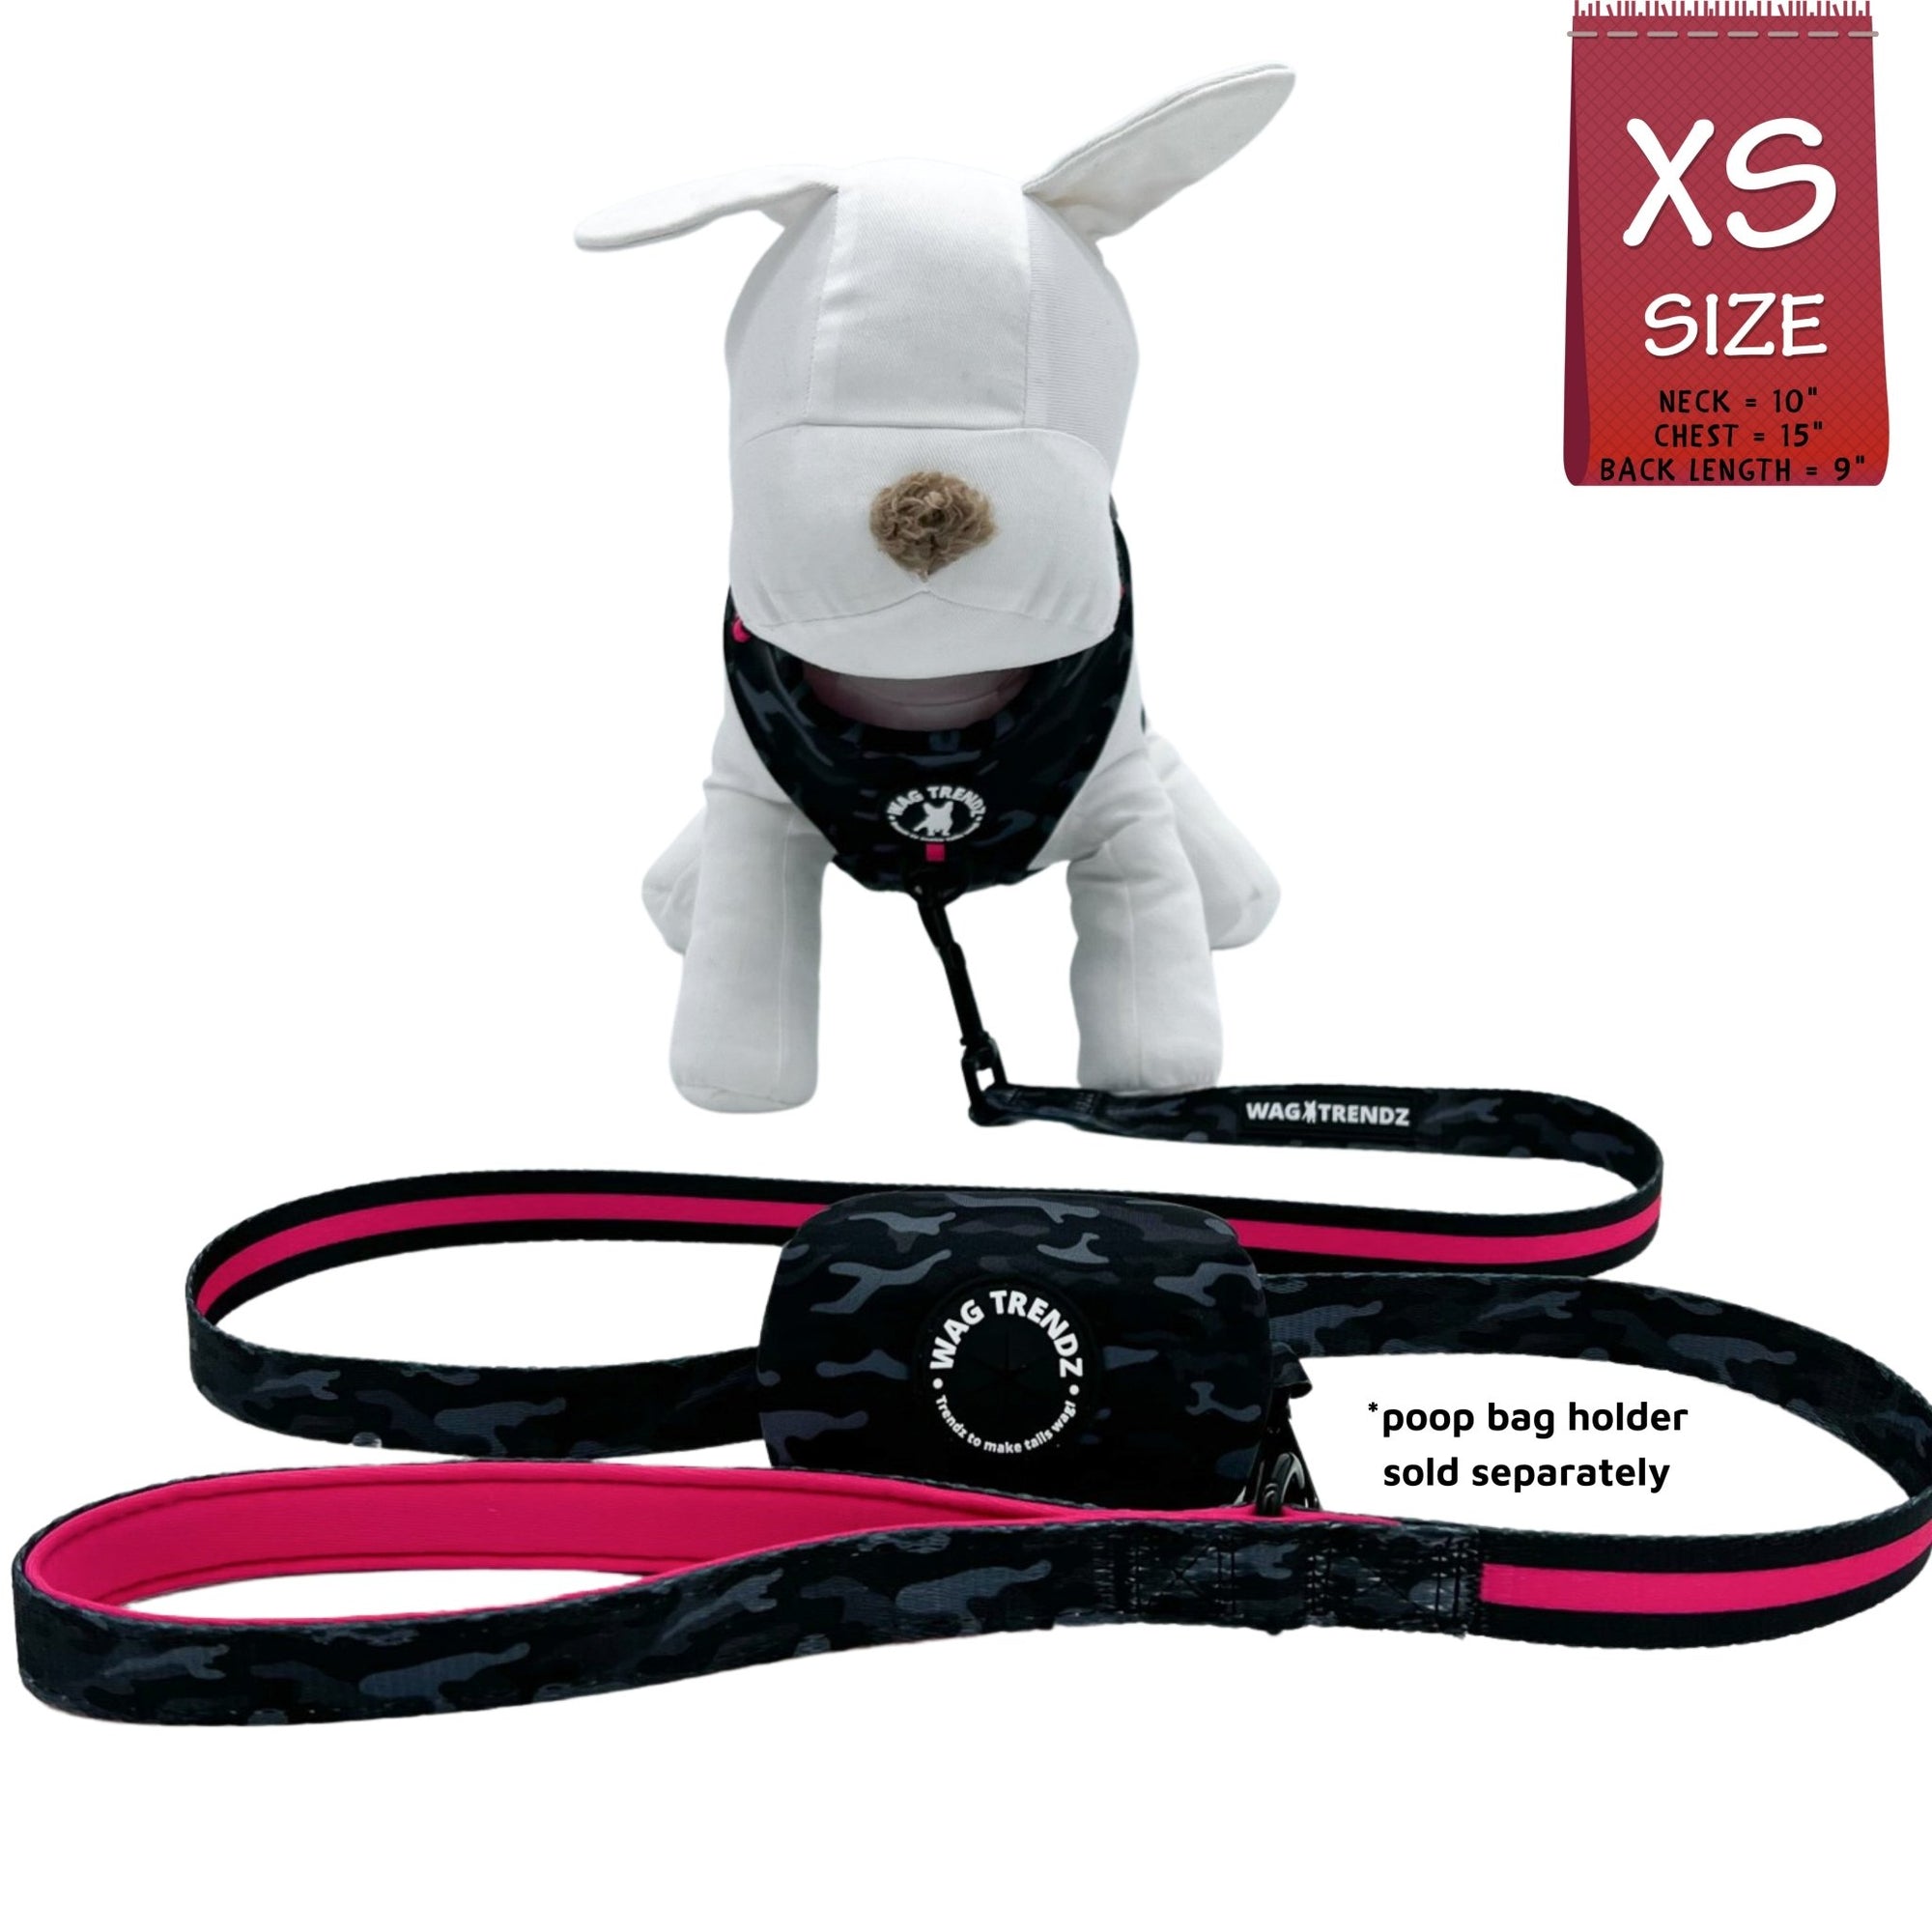 Dog Collar Harness and Leash Set - Small Dog wearing XS Dog Adjustable Harness, matching Dog Leash and Poo Bag Holder in black &amp; gray camo with hot pink accents - against solid white background - Wag Trendz